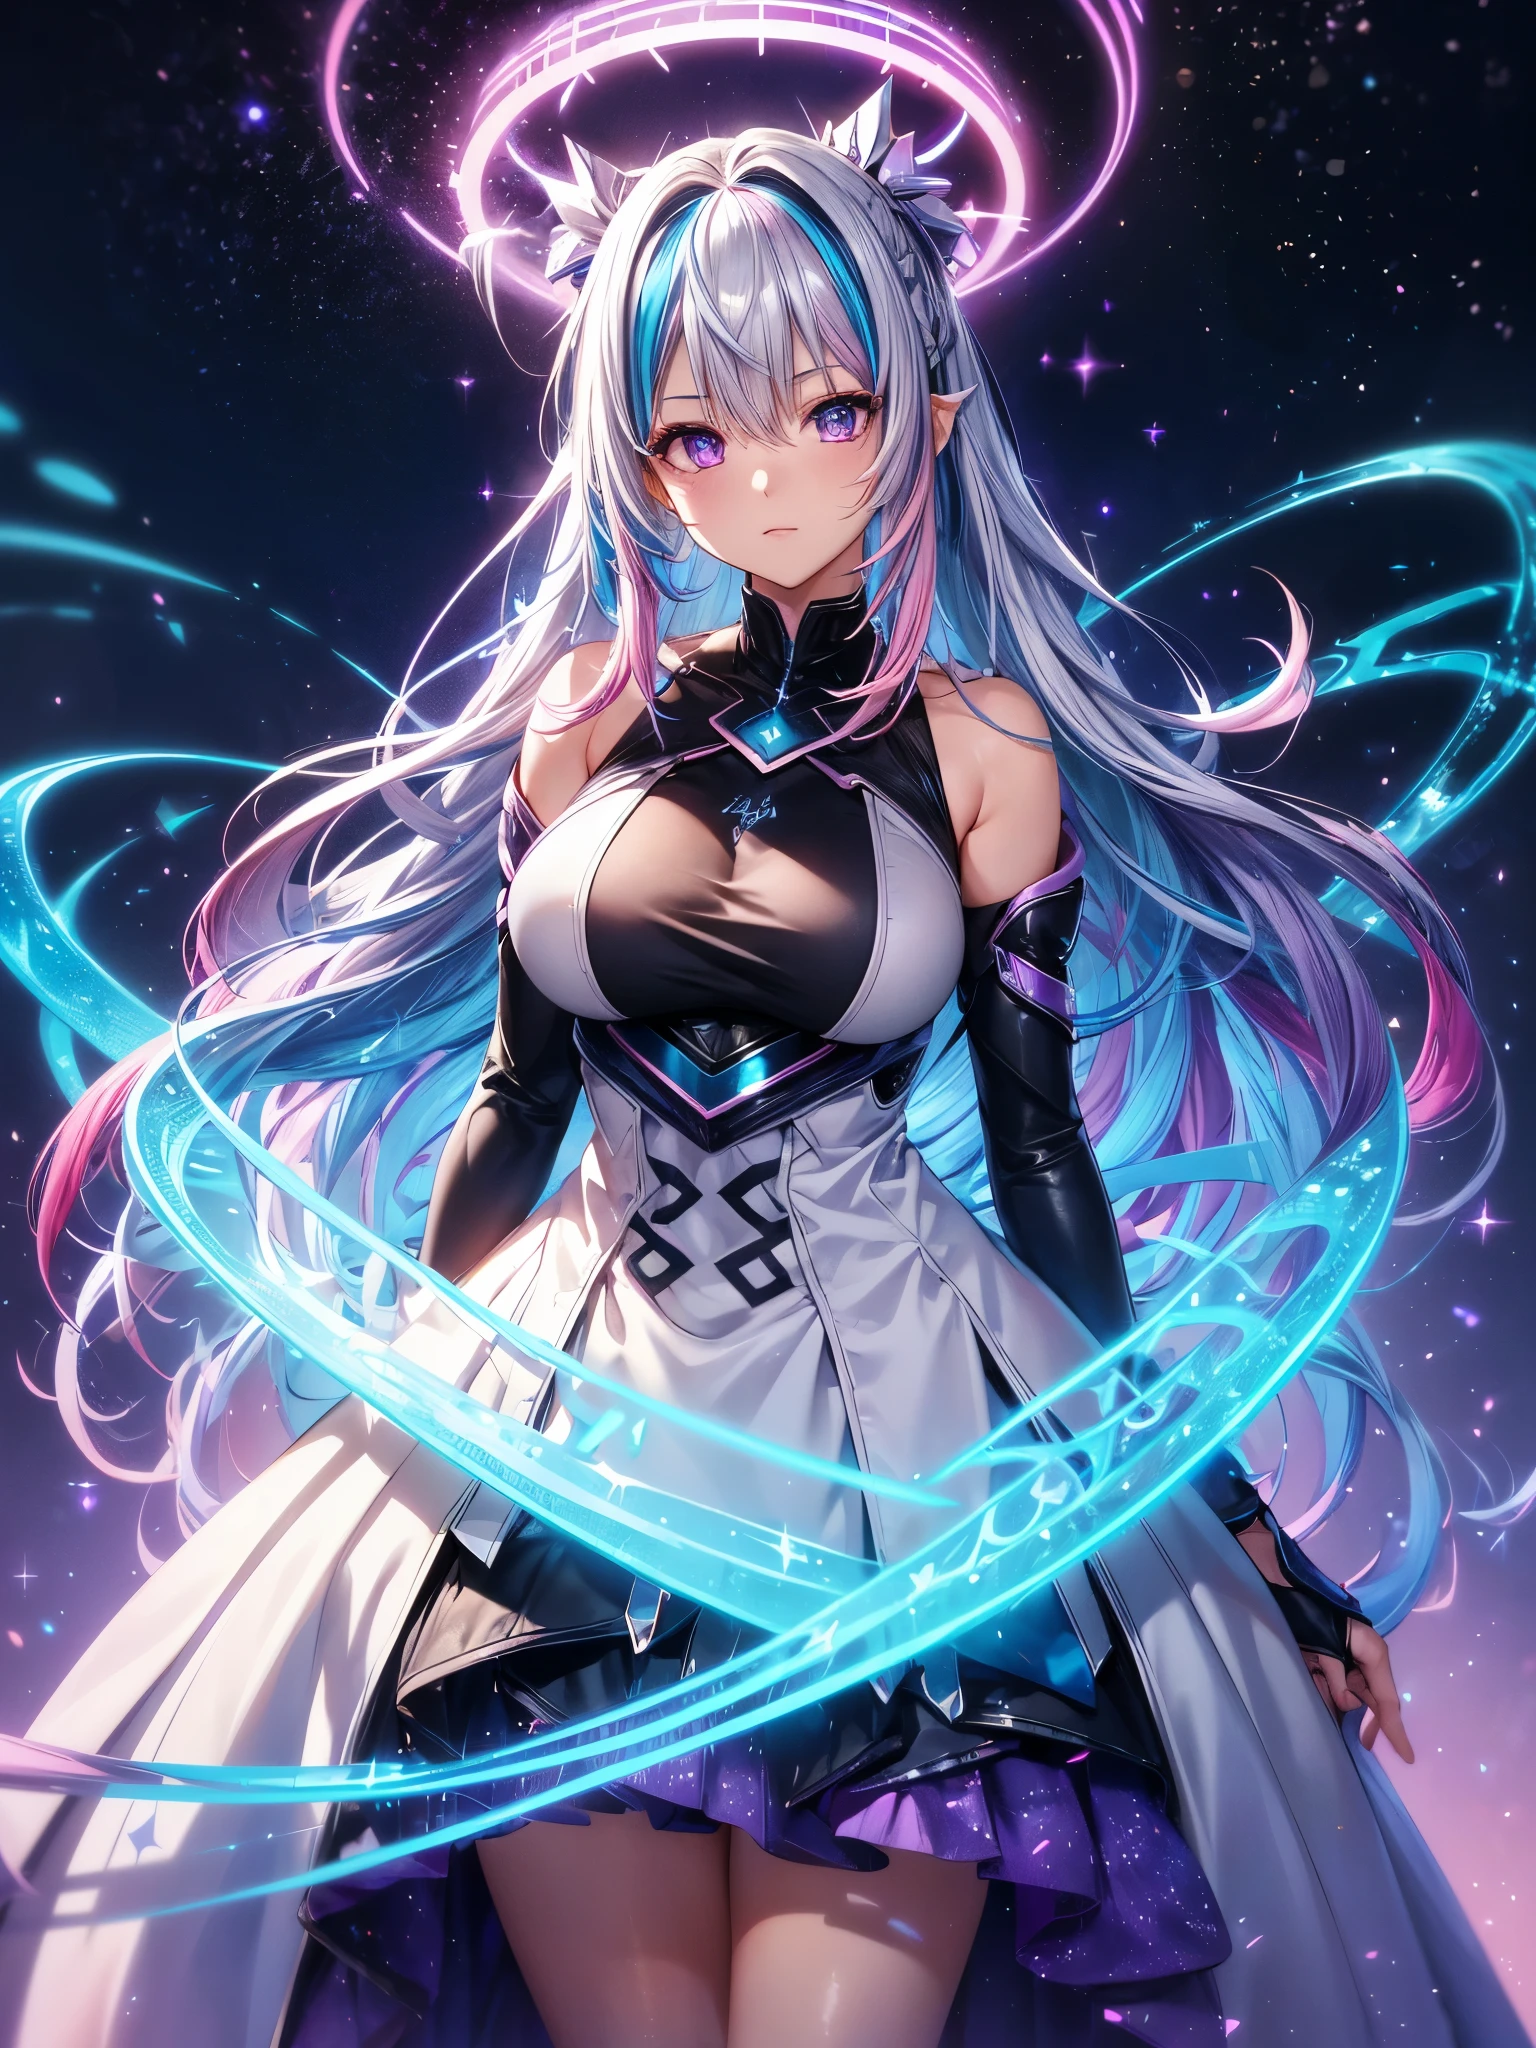 1 girl, one person, (Silver blue hair streaked pink purple:1.4), (Gradient sky blue hair ends:1.6), hair strand, absurdly long hair, single sidelock, wavy hair, shiny hair, floating hair, (Illusion deep purple eyes), delicate eyes, aqua eyes, High like real eyes, ((glowing eyes)), makeup, Focus on face, Very detailed facial, hot body, Random environment, Random pose, on the street, looking at the starry night sky, meteor, Technical clothing masterpiece, White extra long skirt, universe, galaxy, several cross stars beside, Colored lights swirl around the body, (((Extra super huge colorful extra super complex multiple glowing magic circle upright on the back of the head))), cyberpunk, full body shot, realism anime, chiaroscuro, (glowing light), sparkle, ray tracing, cinematic lighting, Futurism, motion blur, perfect transition, god rays, atmospheric perspective, best quality, UHD, super detail, masterpiece, highres, ccurate, retina, Octane Render